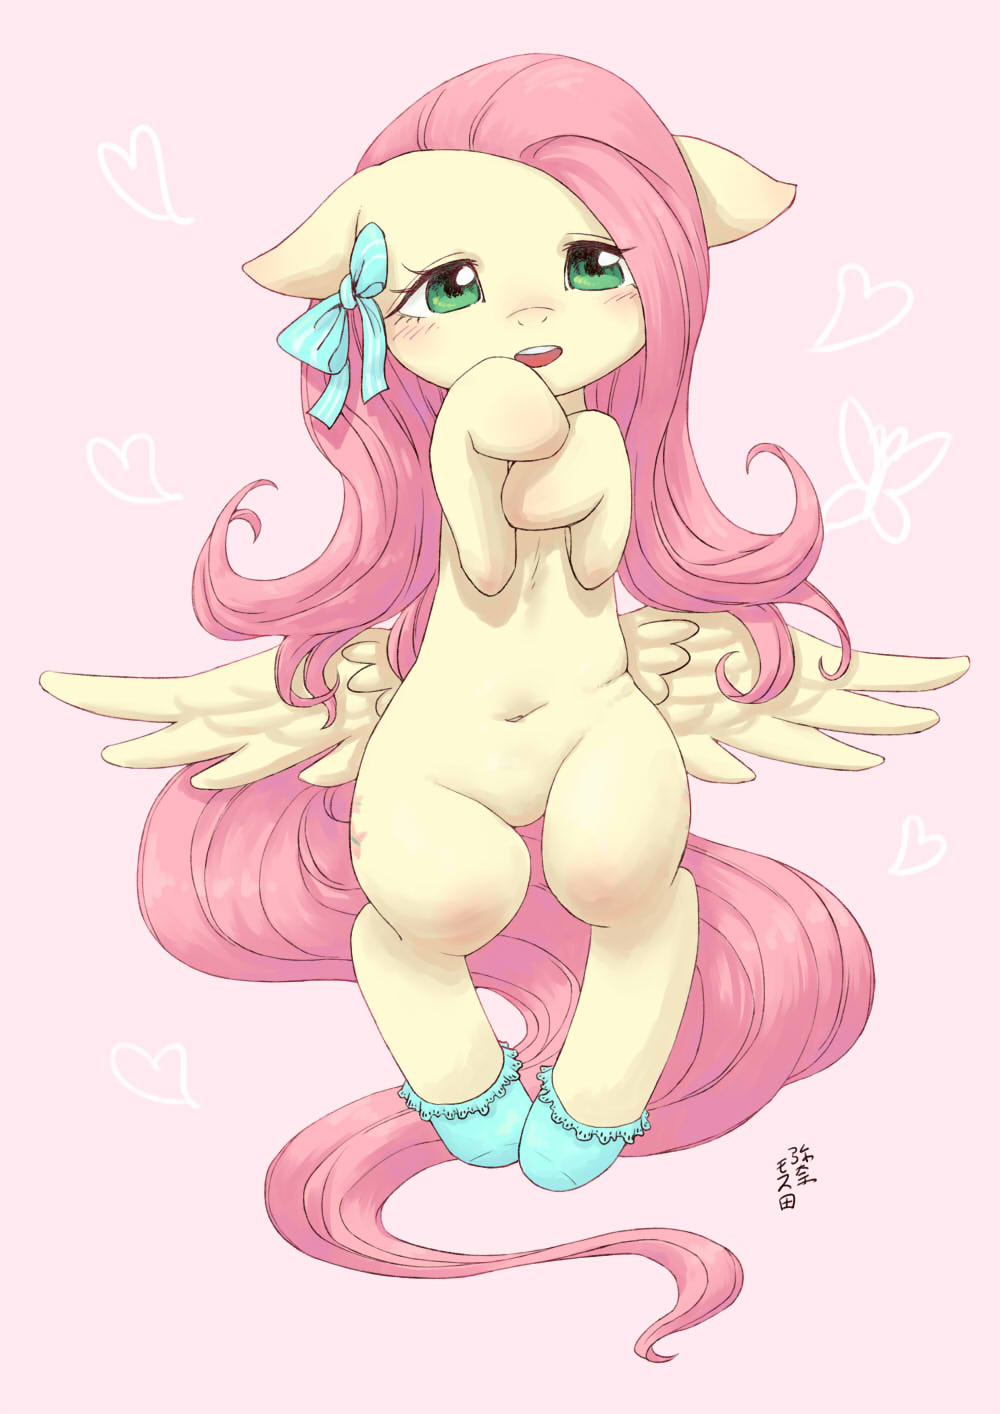 1489901__suggestive_artist-colon-yanamosuda_fluttershy_adorasexy_cute_female_floppy+ears_laying+down_looking+at+you_mare_pegasus_pony_sexy_solo_solo+fe.jpeg